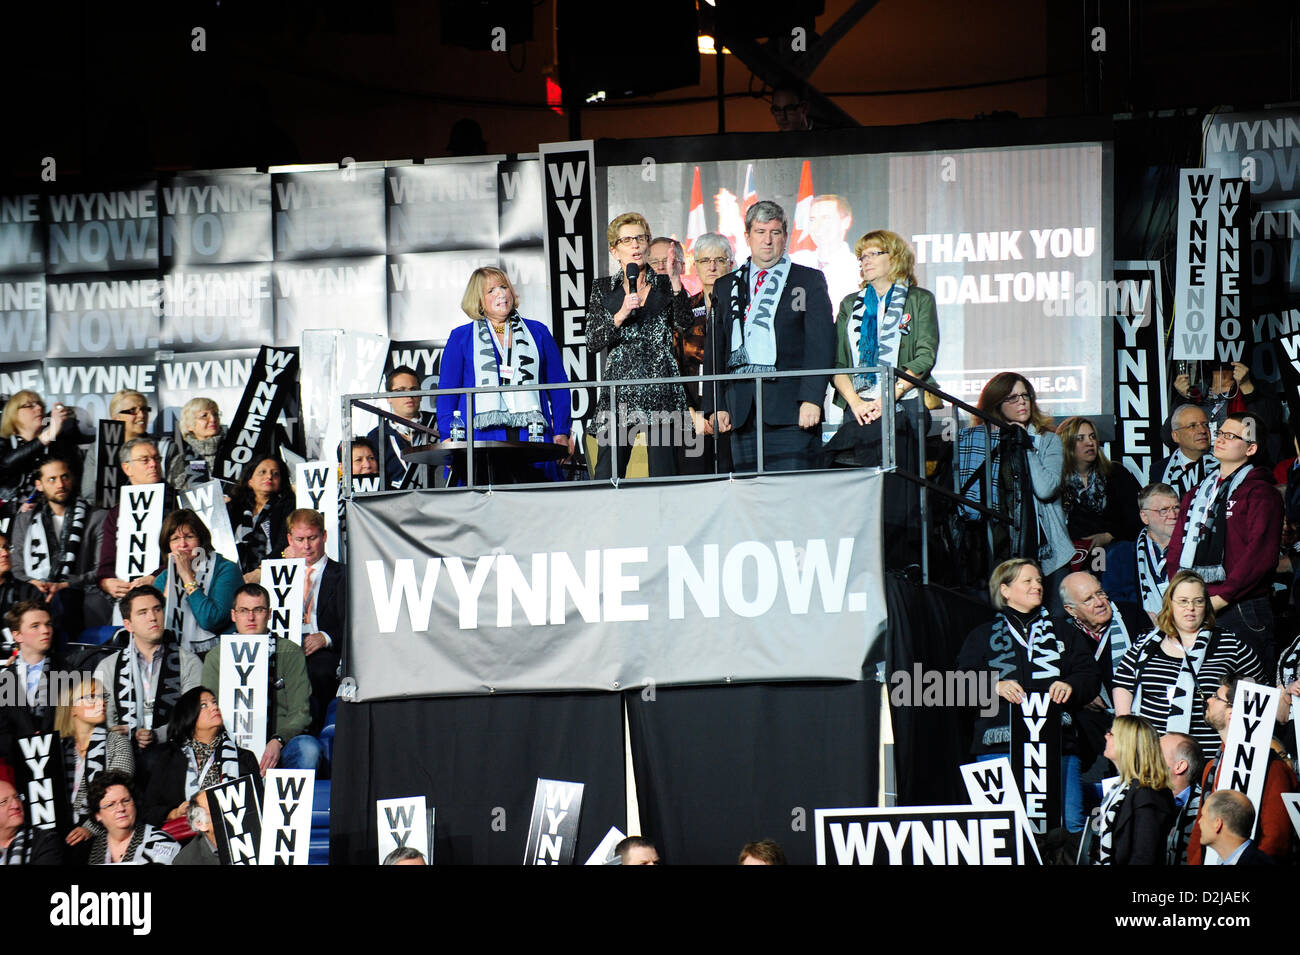 Toronto, Canada. 25th January 2013. Ontario Liberal Leadership candidate Kathleen Wynne addresses the crowd during a tribute to departing Current Ontario Premier Dalton McGuinty. The ruling provincial Liberal party is meeting 25 Jan at the Maple Leaf Gardens to vote for a successor to Current Ontario Premier Dalton McGuinty. Credit:  Victor Biro / Alamy Live News. Stock Photo